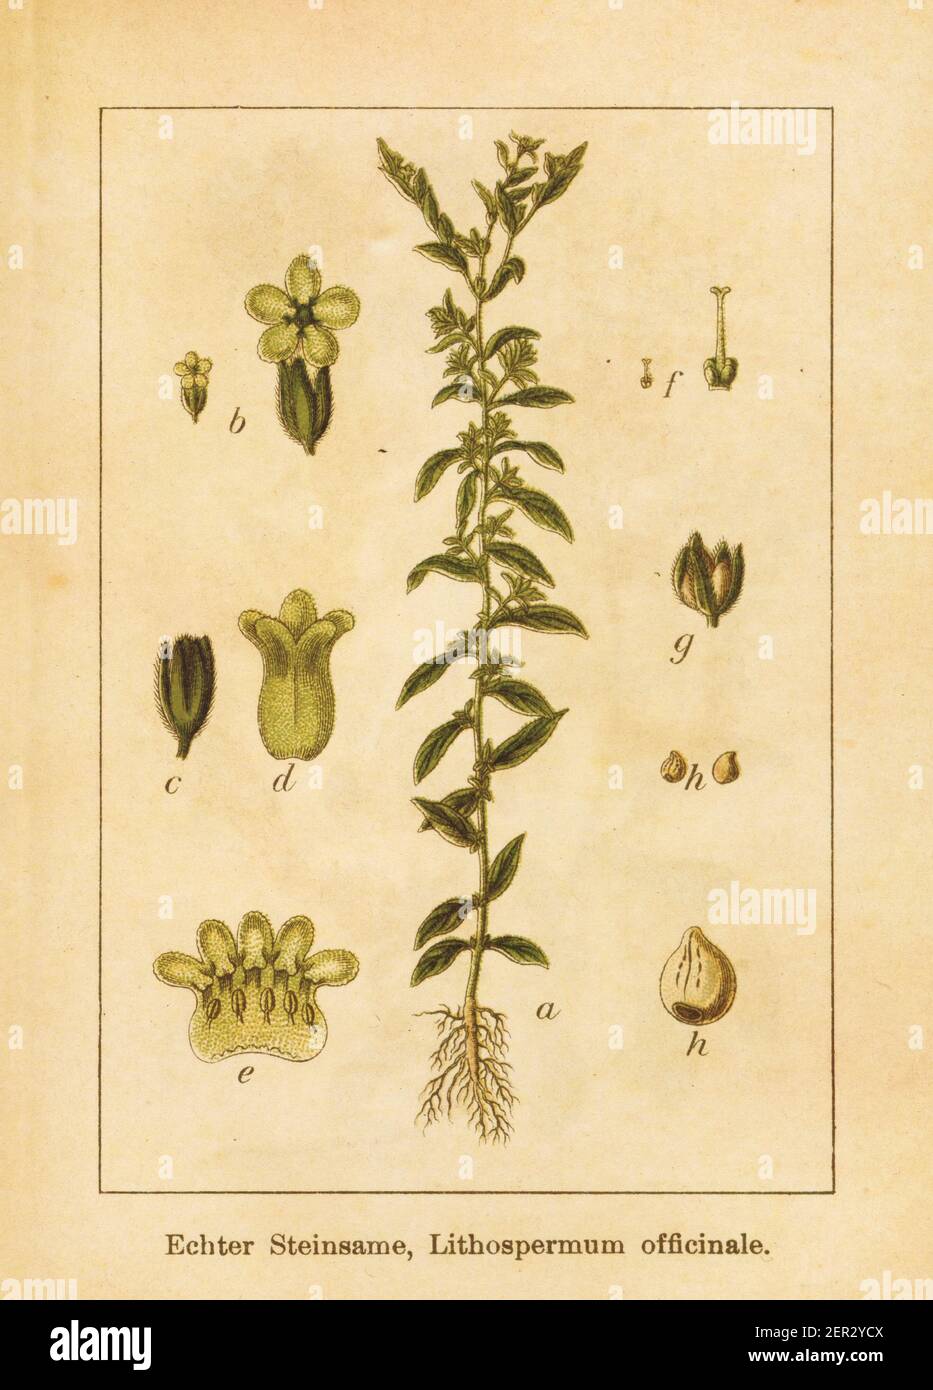 Antique illustration of a lithospermum officinale, also known as European stoneseed or common gromwell. Engraved by Jacob Sturm (1771-1848) and publis Stock Photo